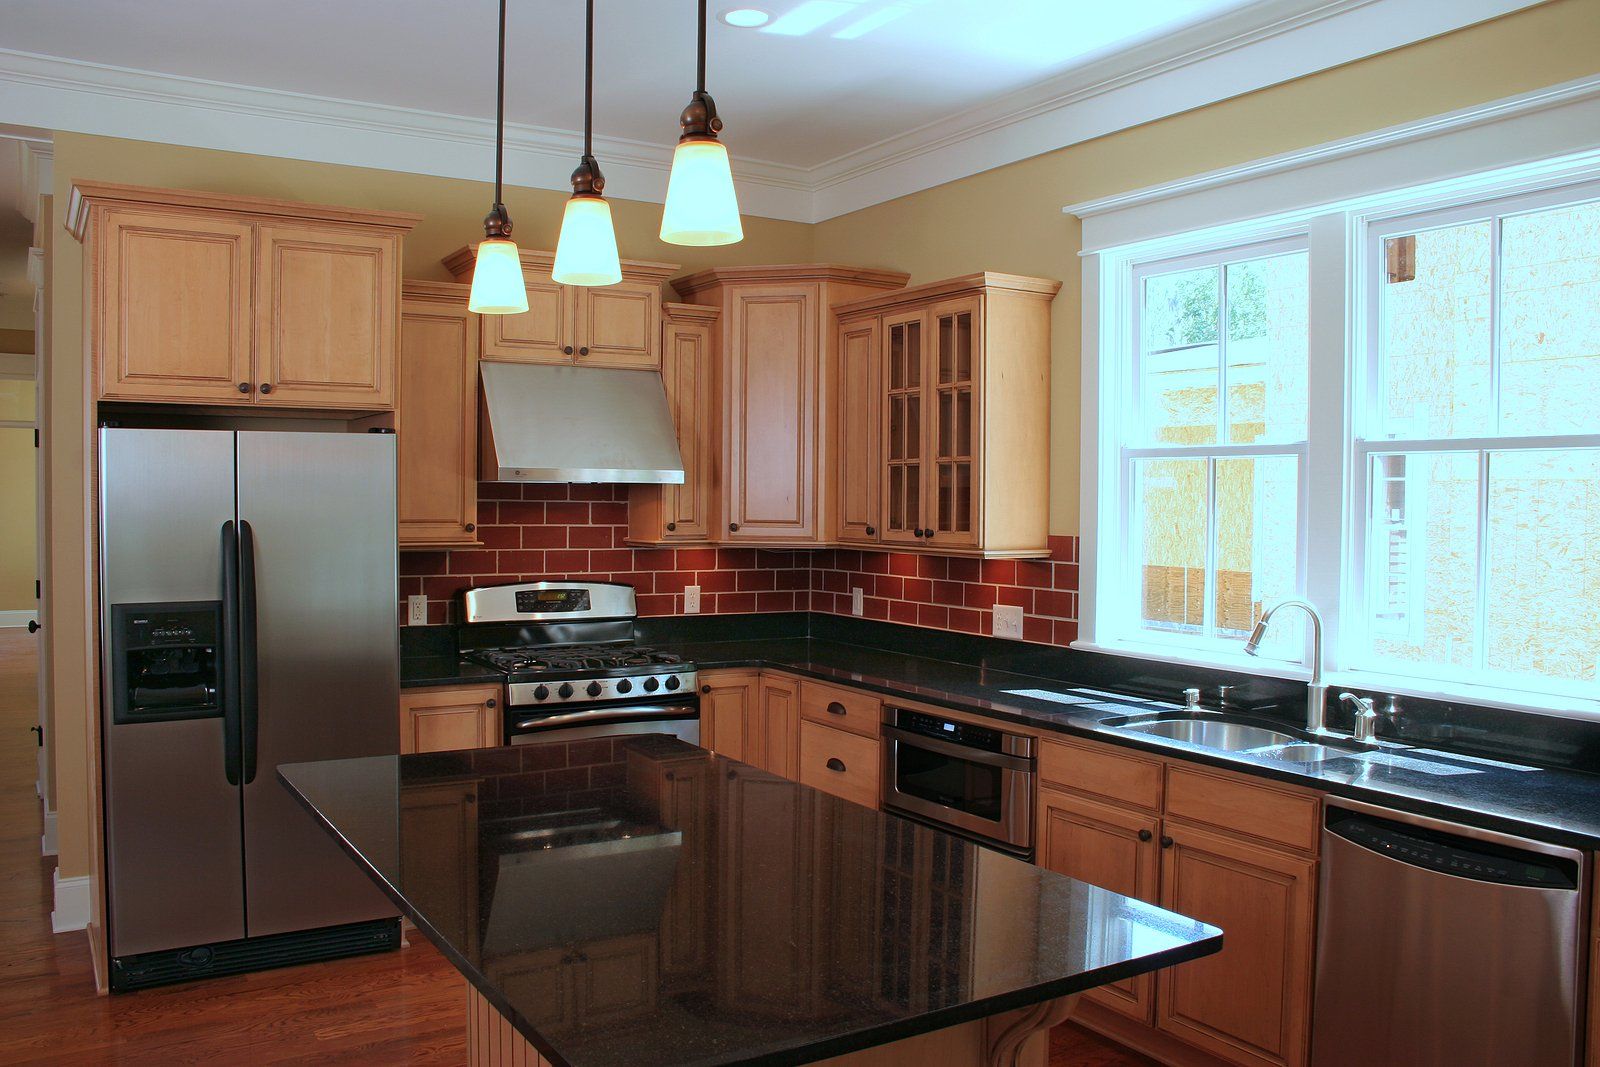 Kitchen Remodeling Contractors Near You